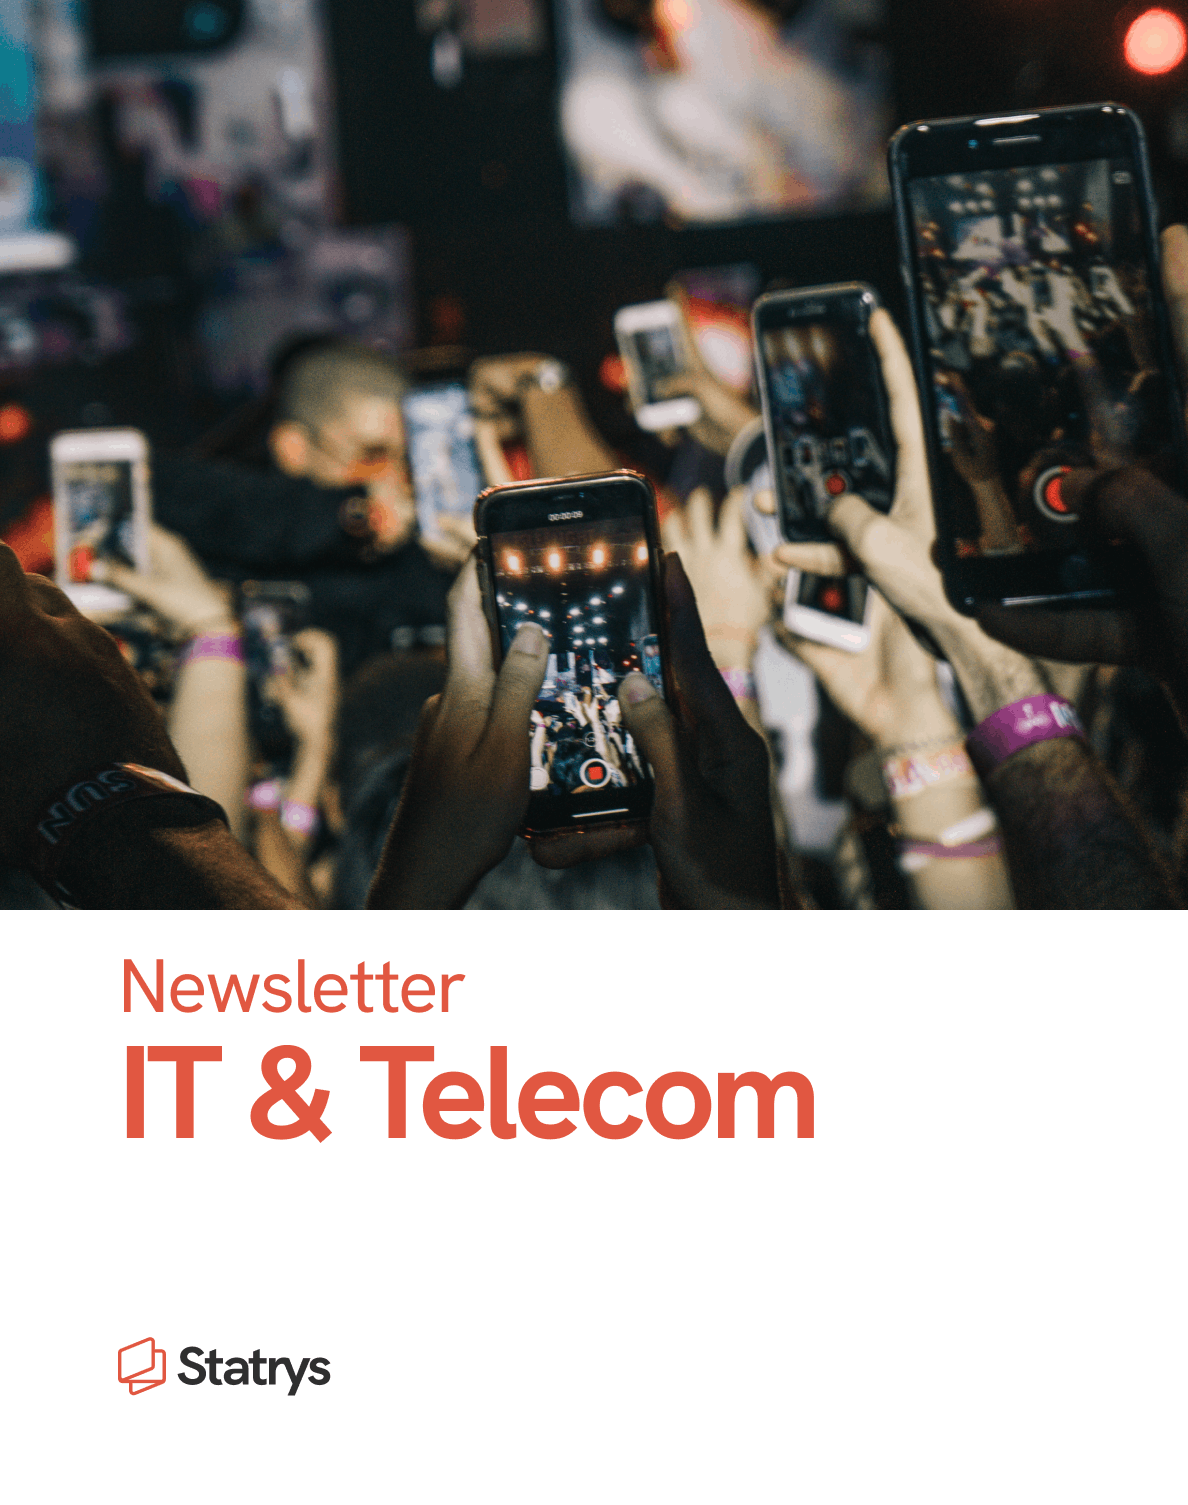 IT and telecom newsletter